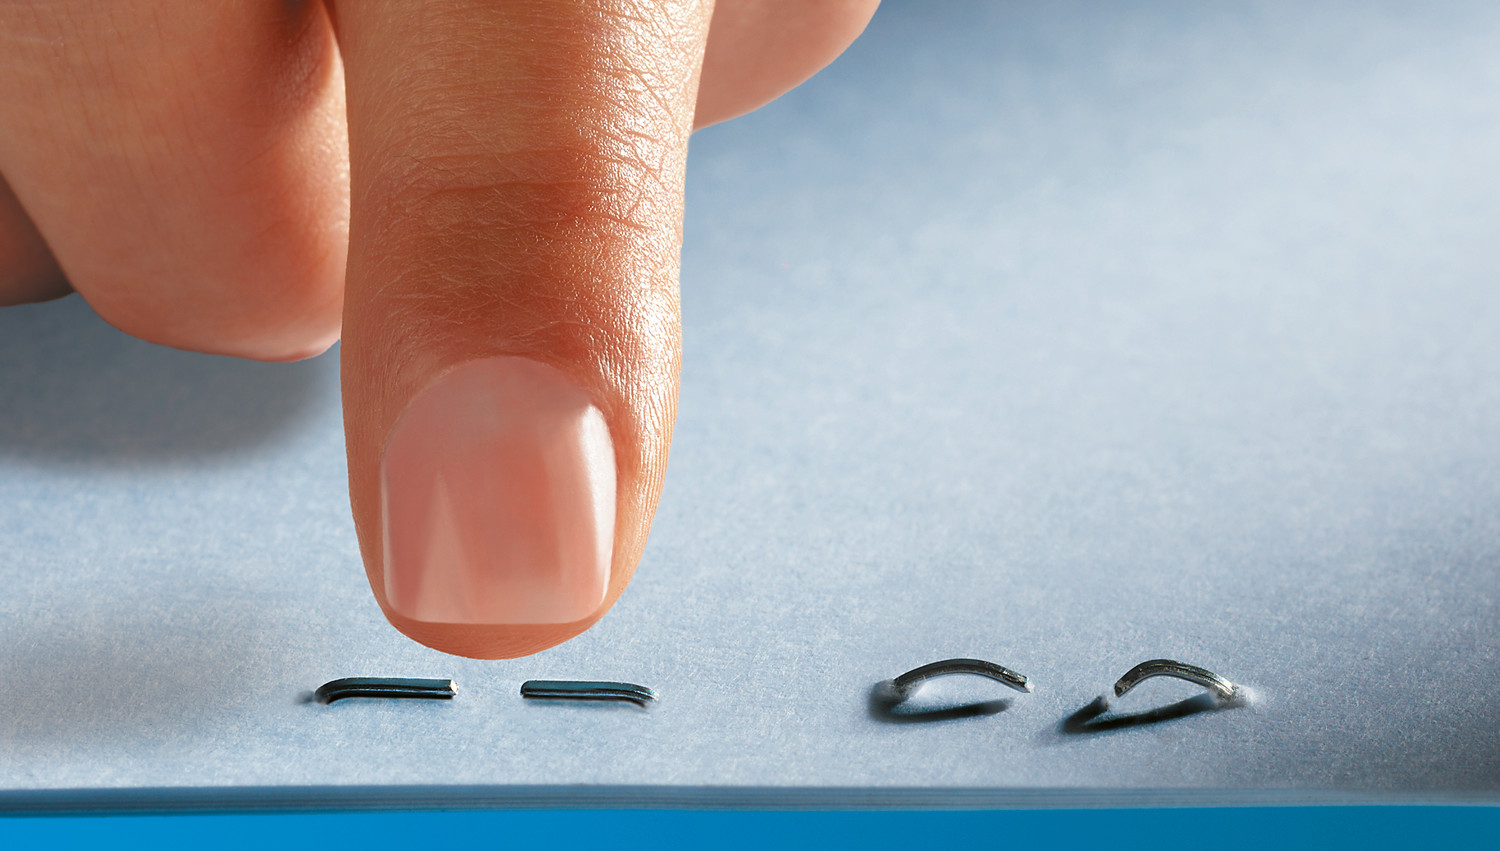 The minimum amount of space taken up by staple ends optimises binder capacity. Despite flat-clinch stapling, staples are easily removed from paper with a staple remover.